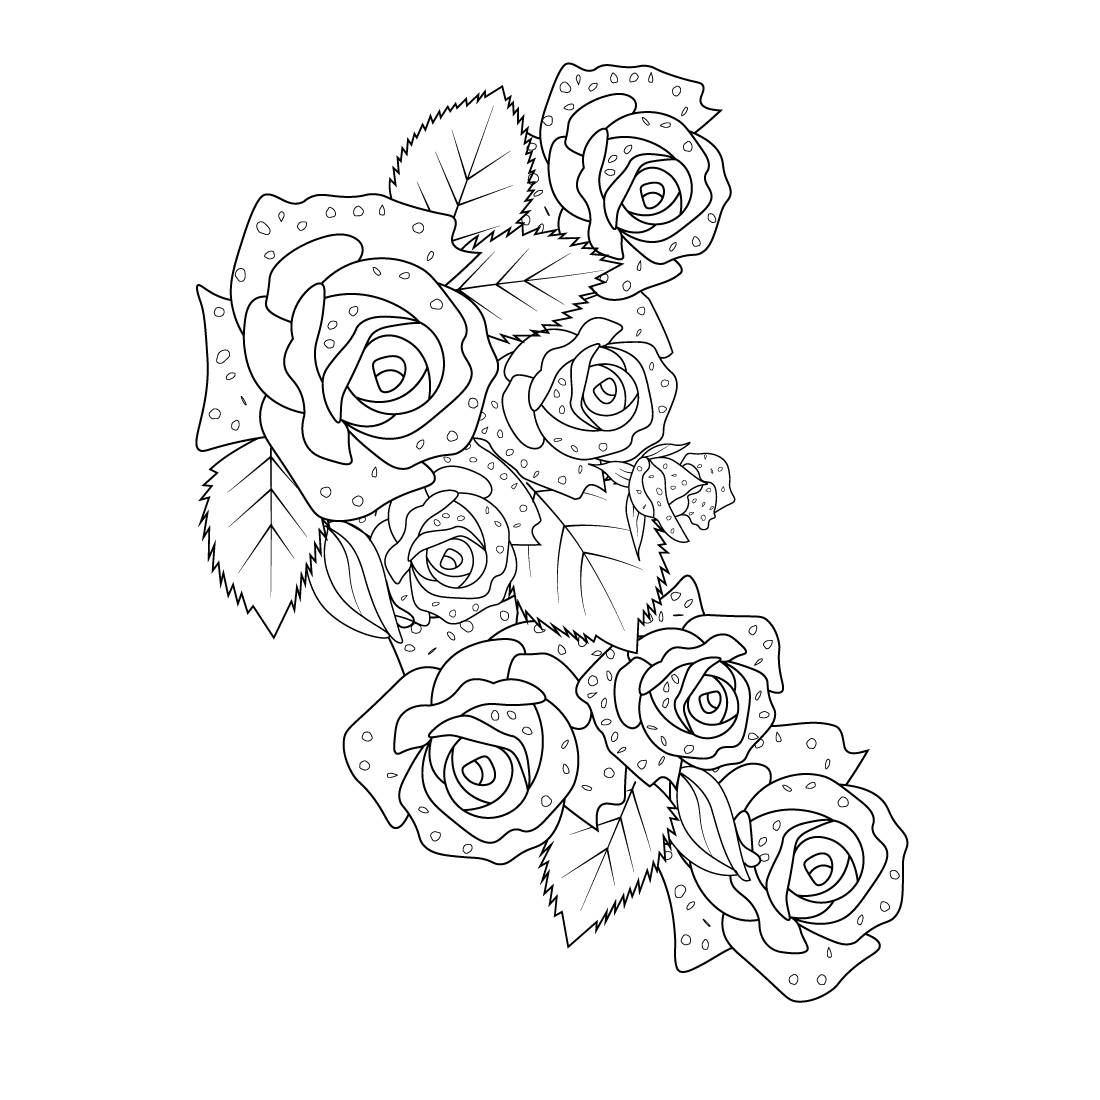 Sketch style Rose tattoo sketch at theYoucom